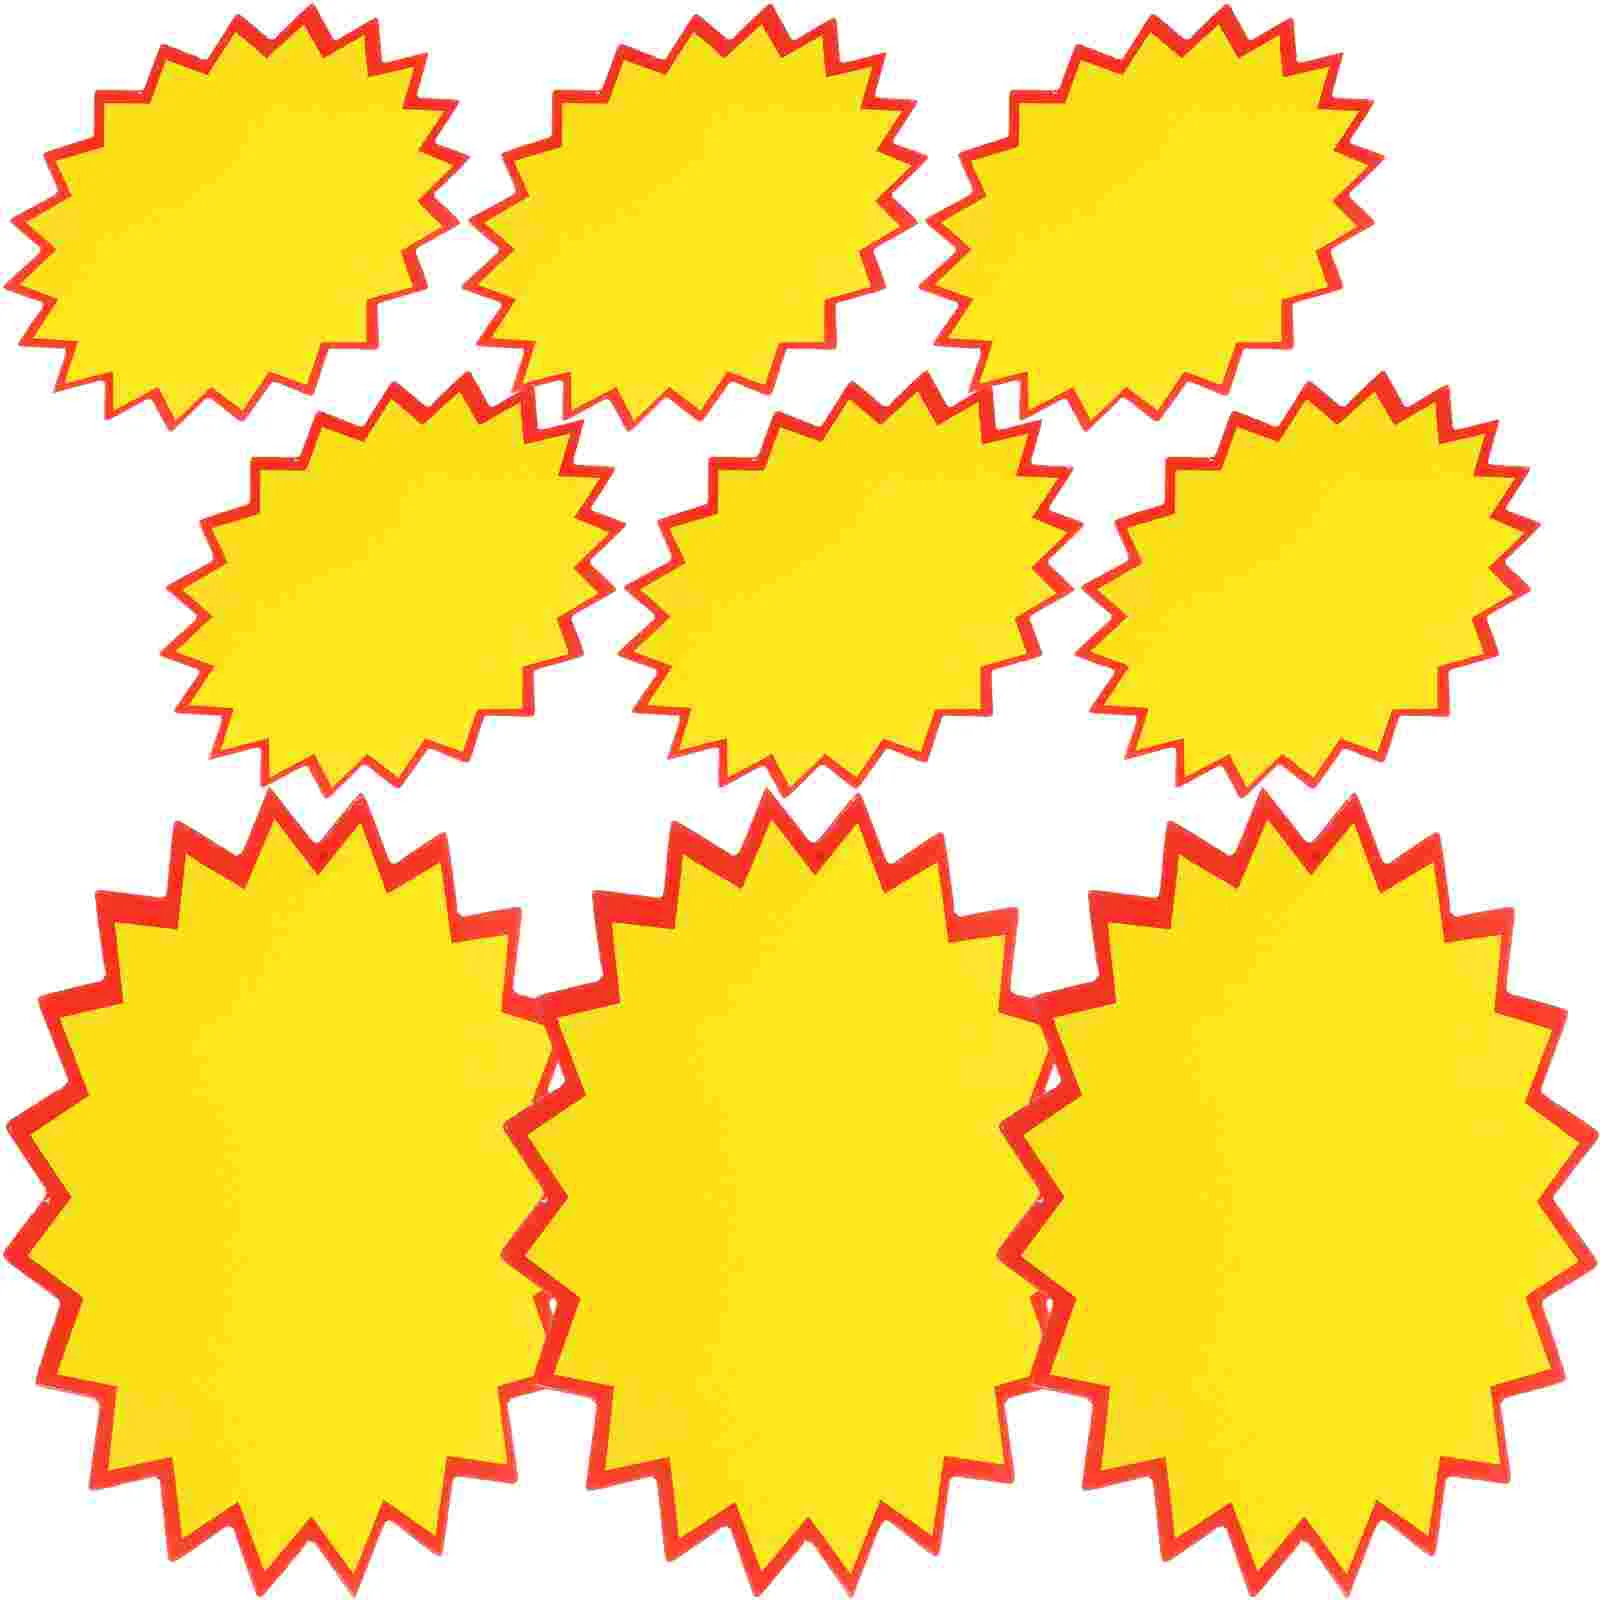 

200pcs Blank Star Burst Signs Signs Burst Paper Signs Price Label Tags, Garage Sale Supplies Sign, Sale Supplies Price Tags